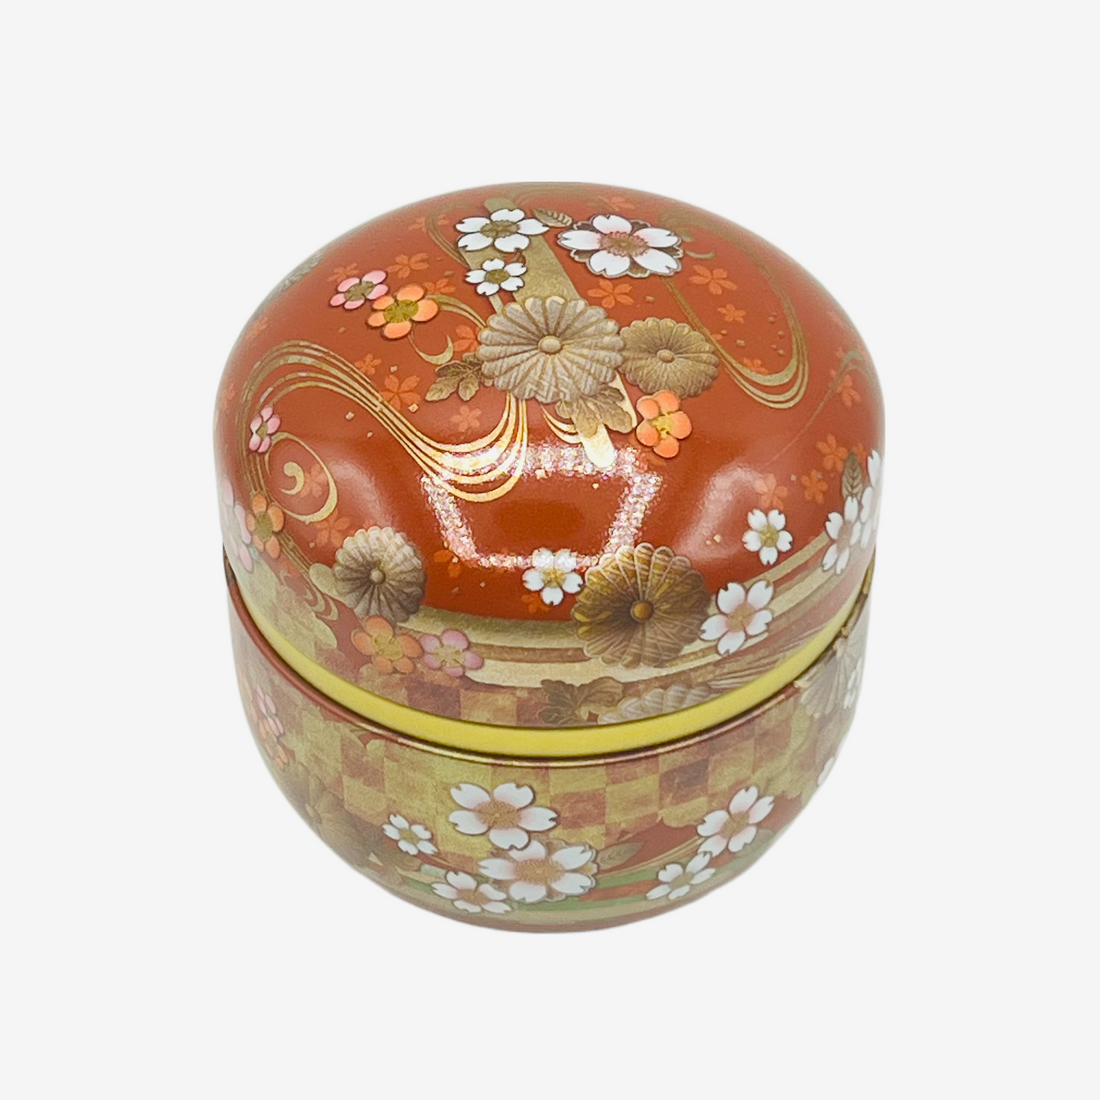 Tame Golden Leaf Brown Resin Lacquered Tea Canister - Japanese